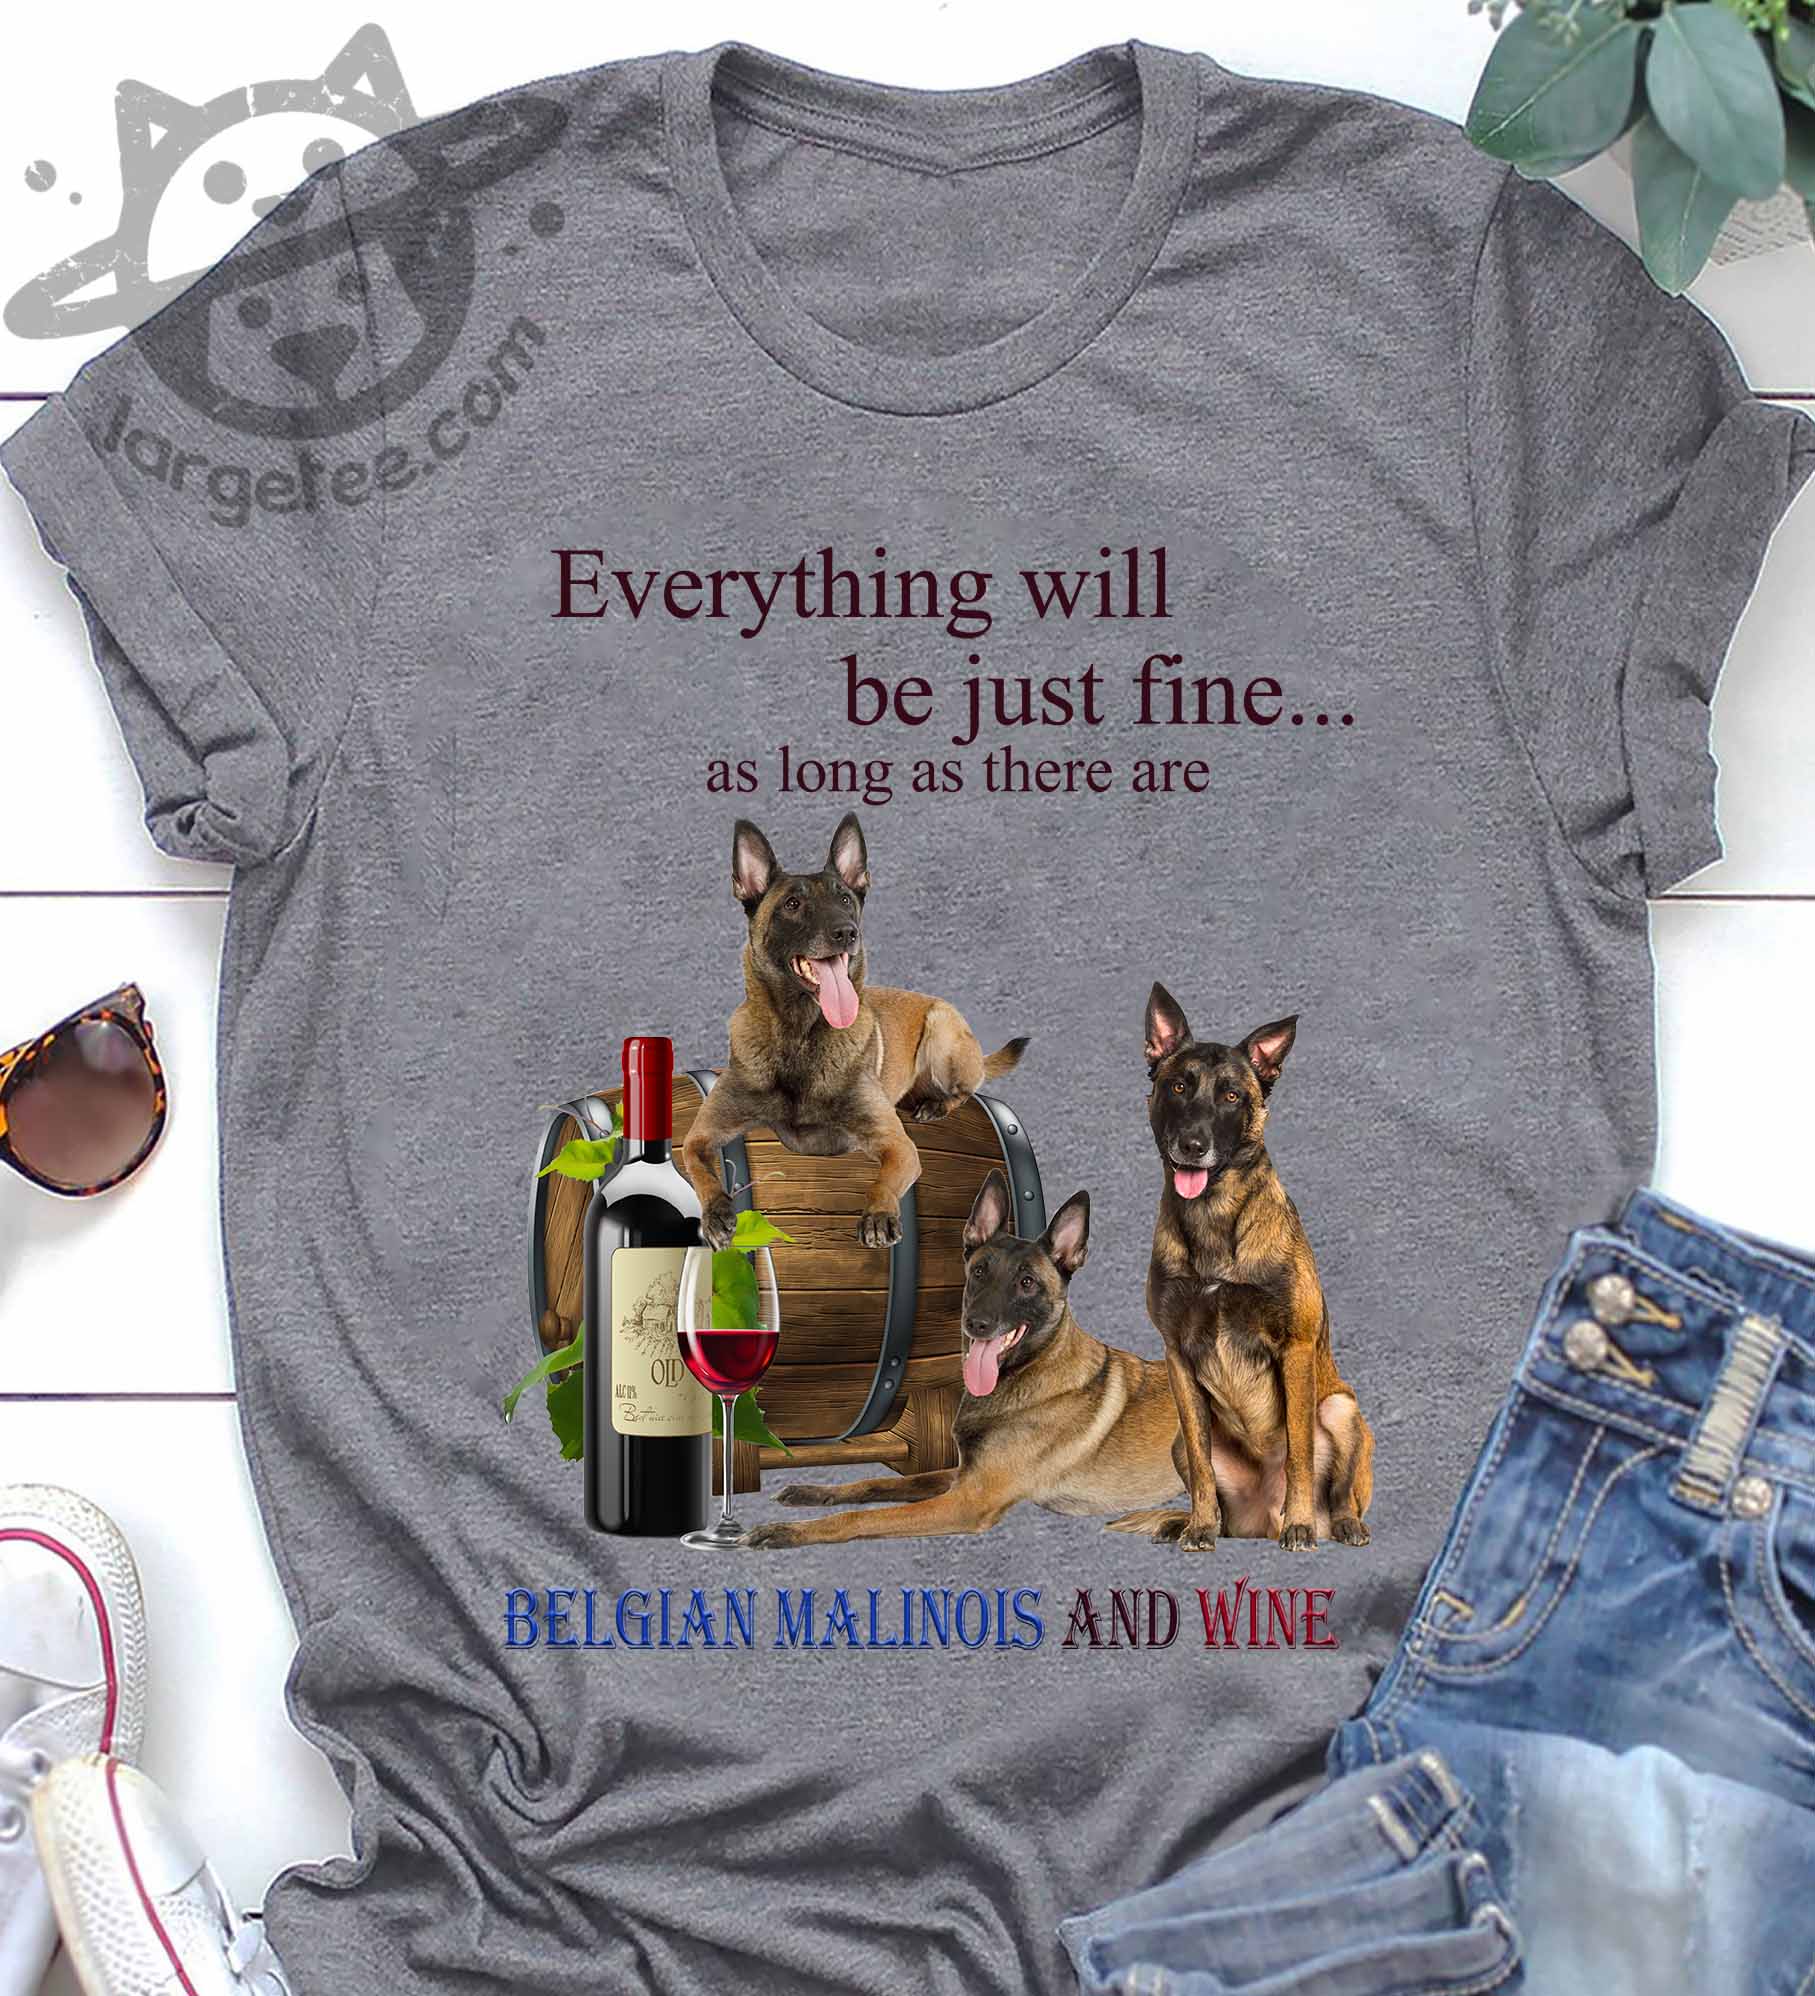 Everything will be just fine as long as there are Belgian Malinois and wine